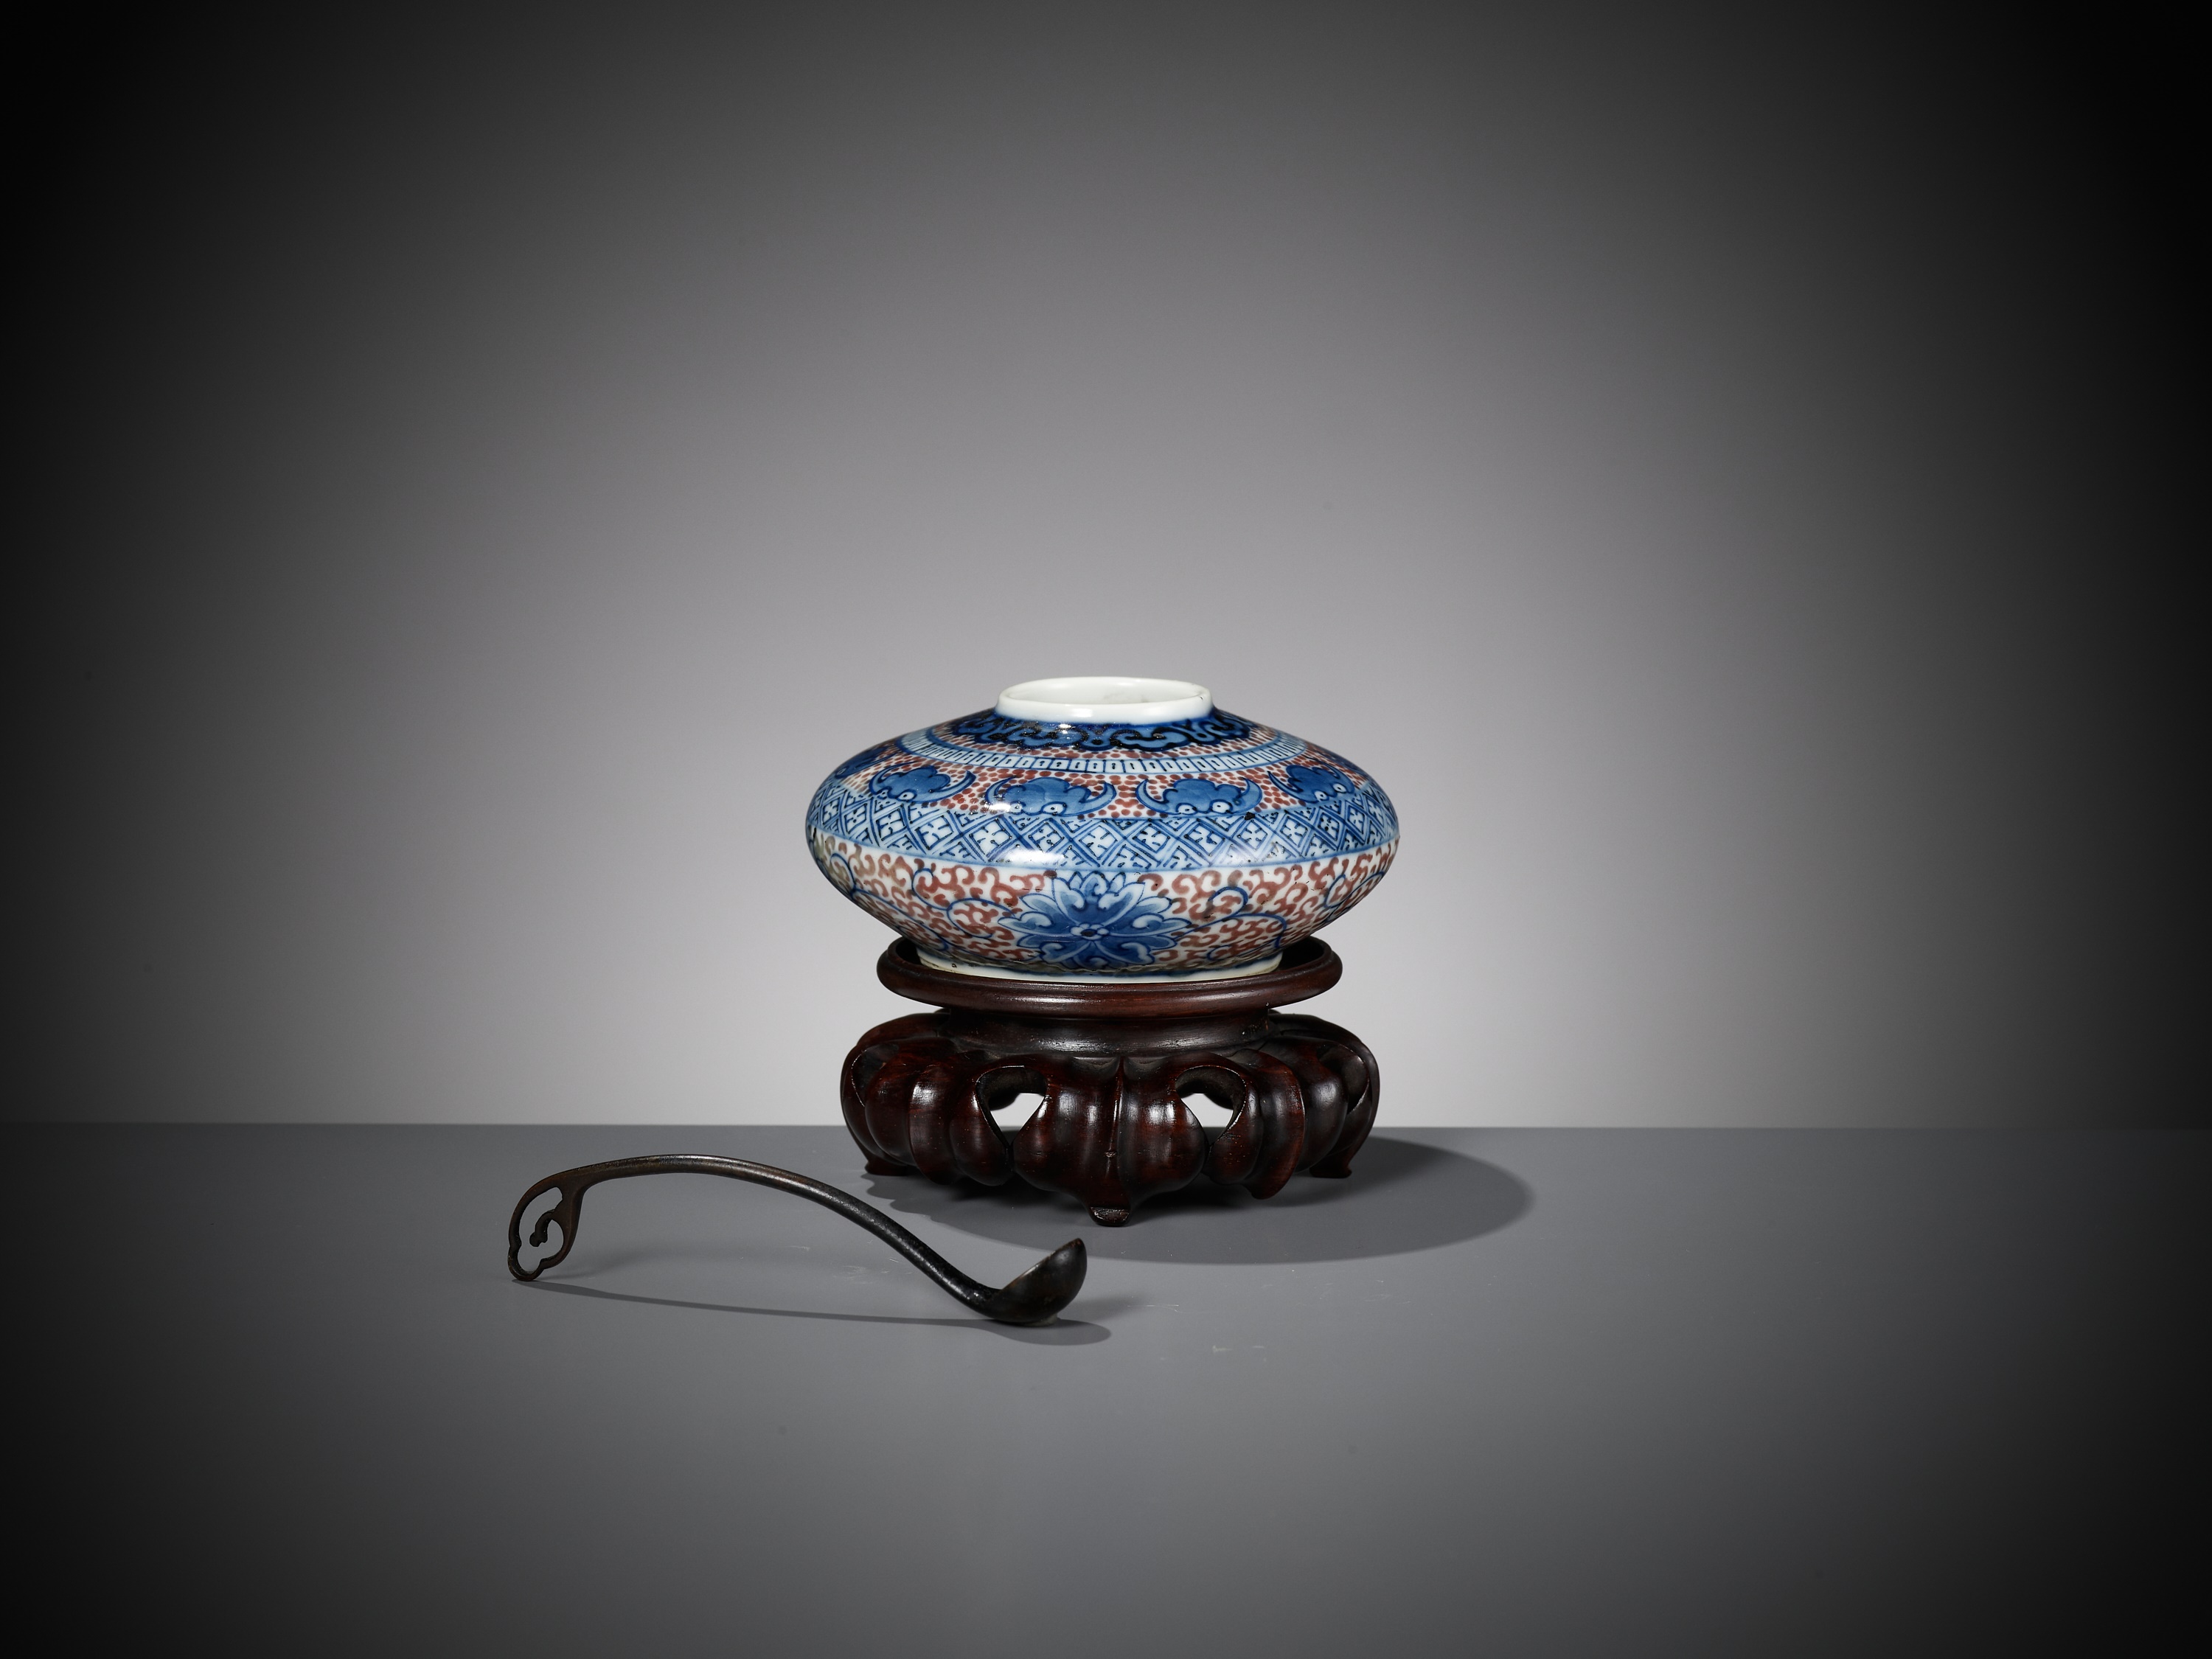 A PORCELAIN WATER POT, WITH MATCHING BRONZE SPOON AND WOOD STAND, QING DYNASTY - Image 12 of 14